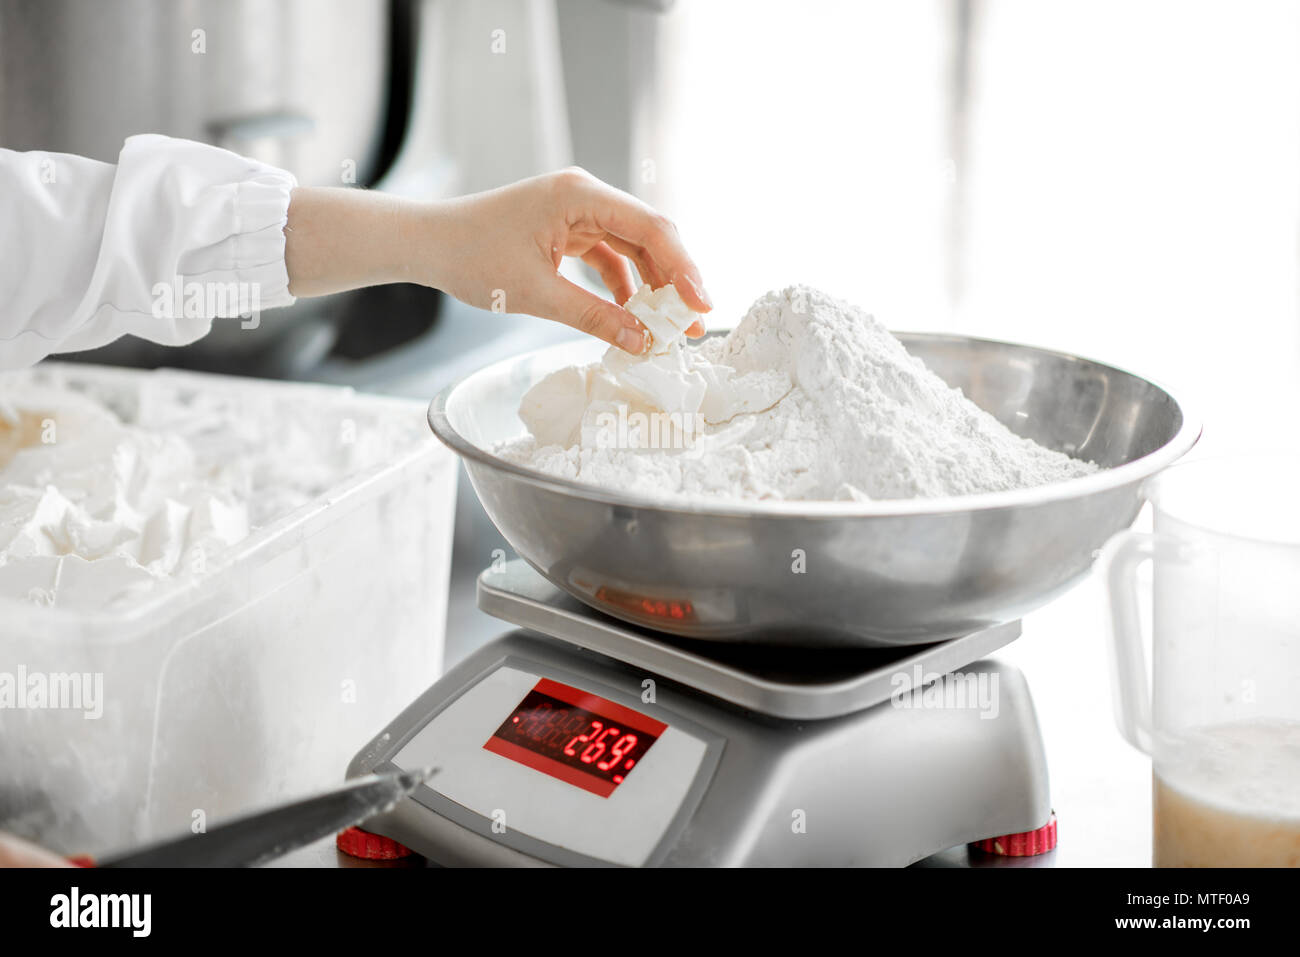 https://c8.alamy.com/comp/MTF0A9/weighing-flour-for-baking-with-professional-scales-at-the-manufacturing-close-up-view-MTF0A9.jpg